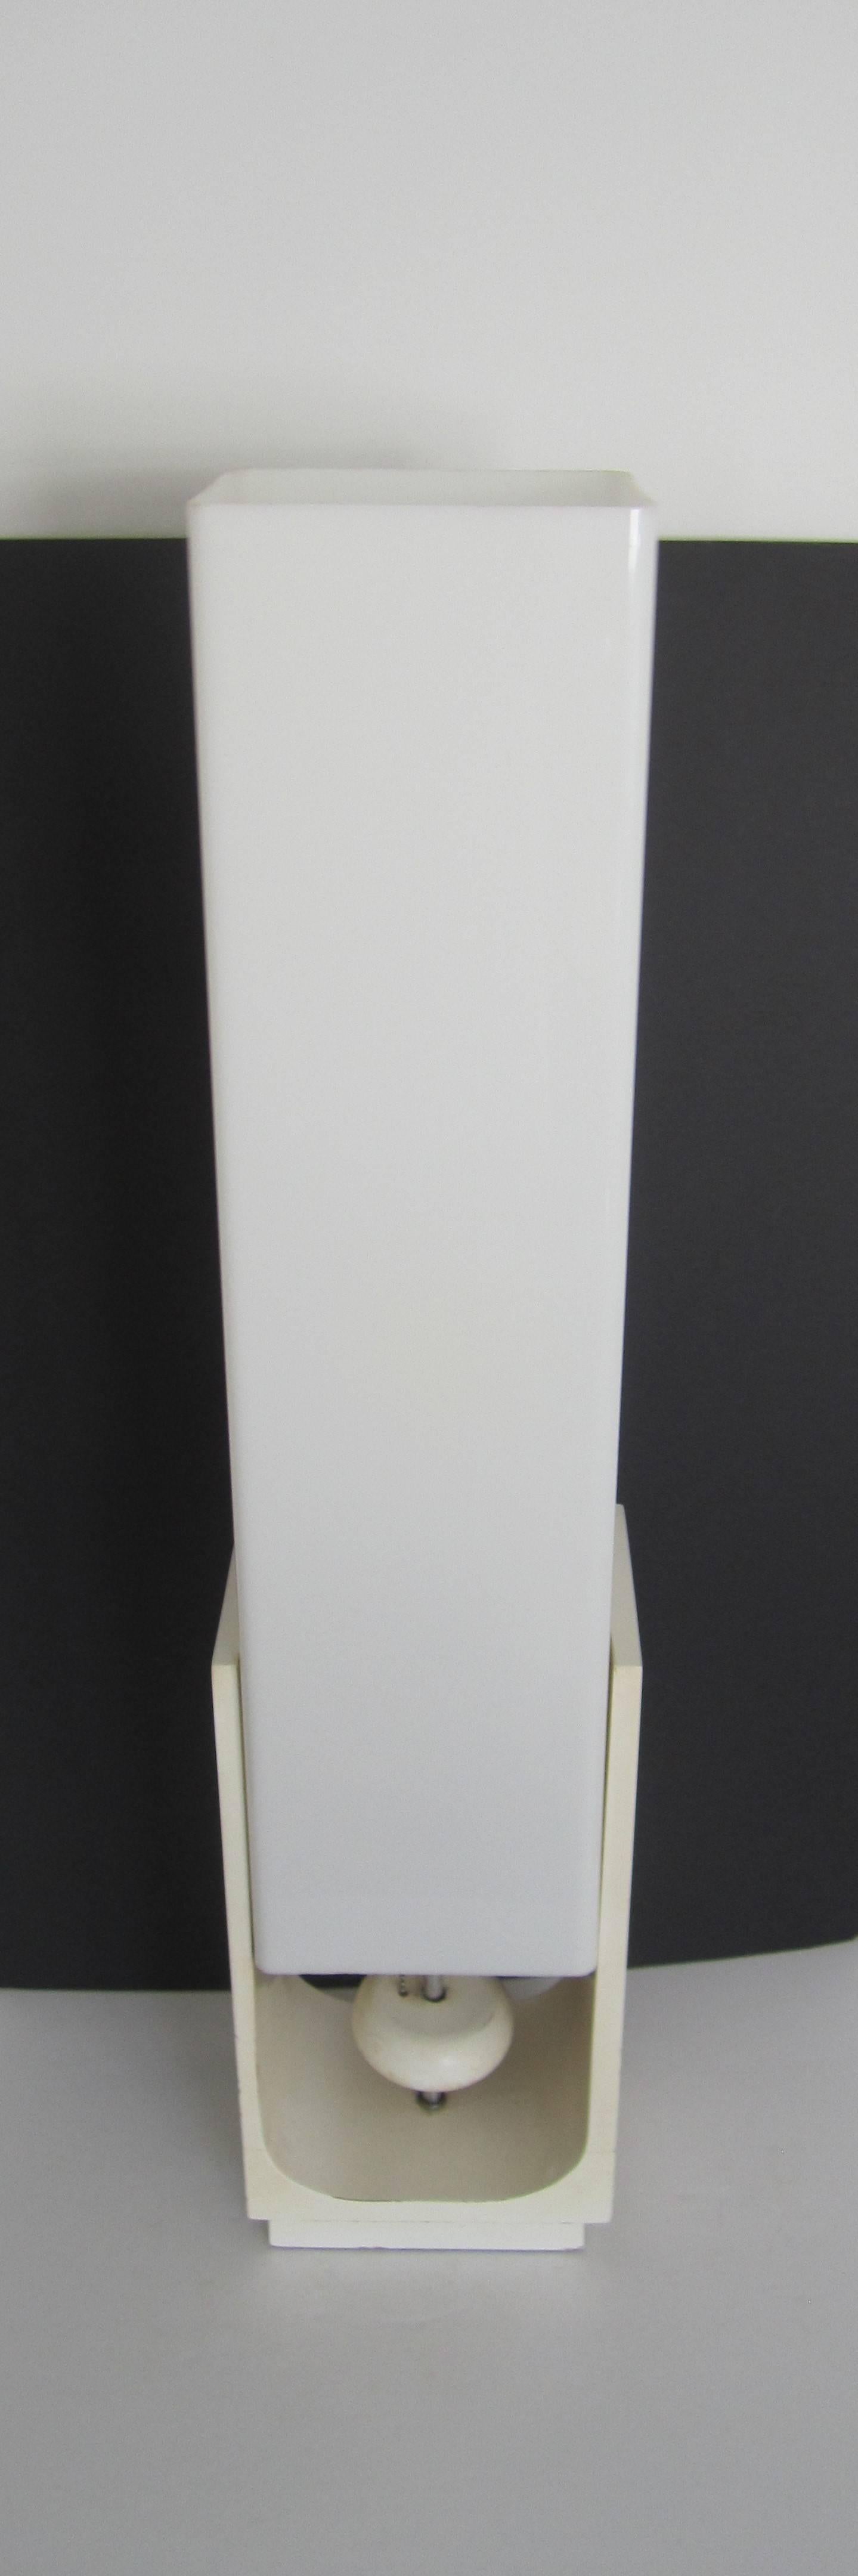 Modern White Acrylic Table or Floor Lamp, circa 1960s For Sale 4